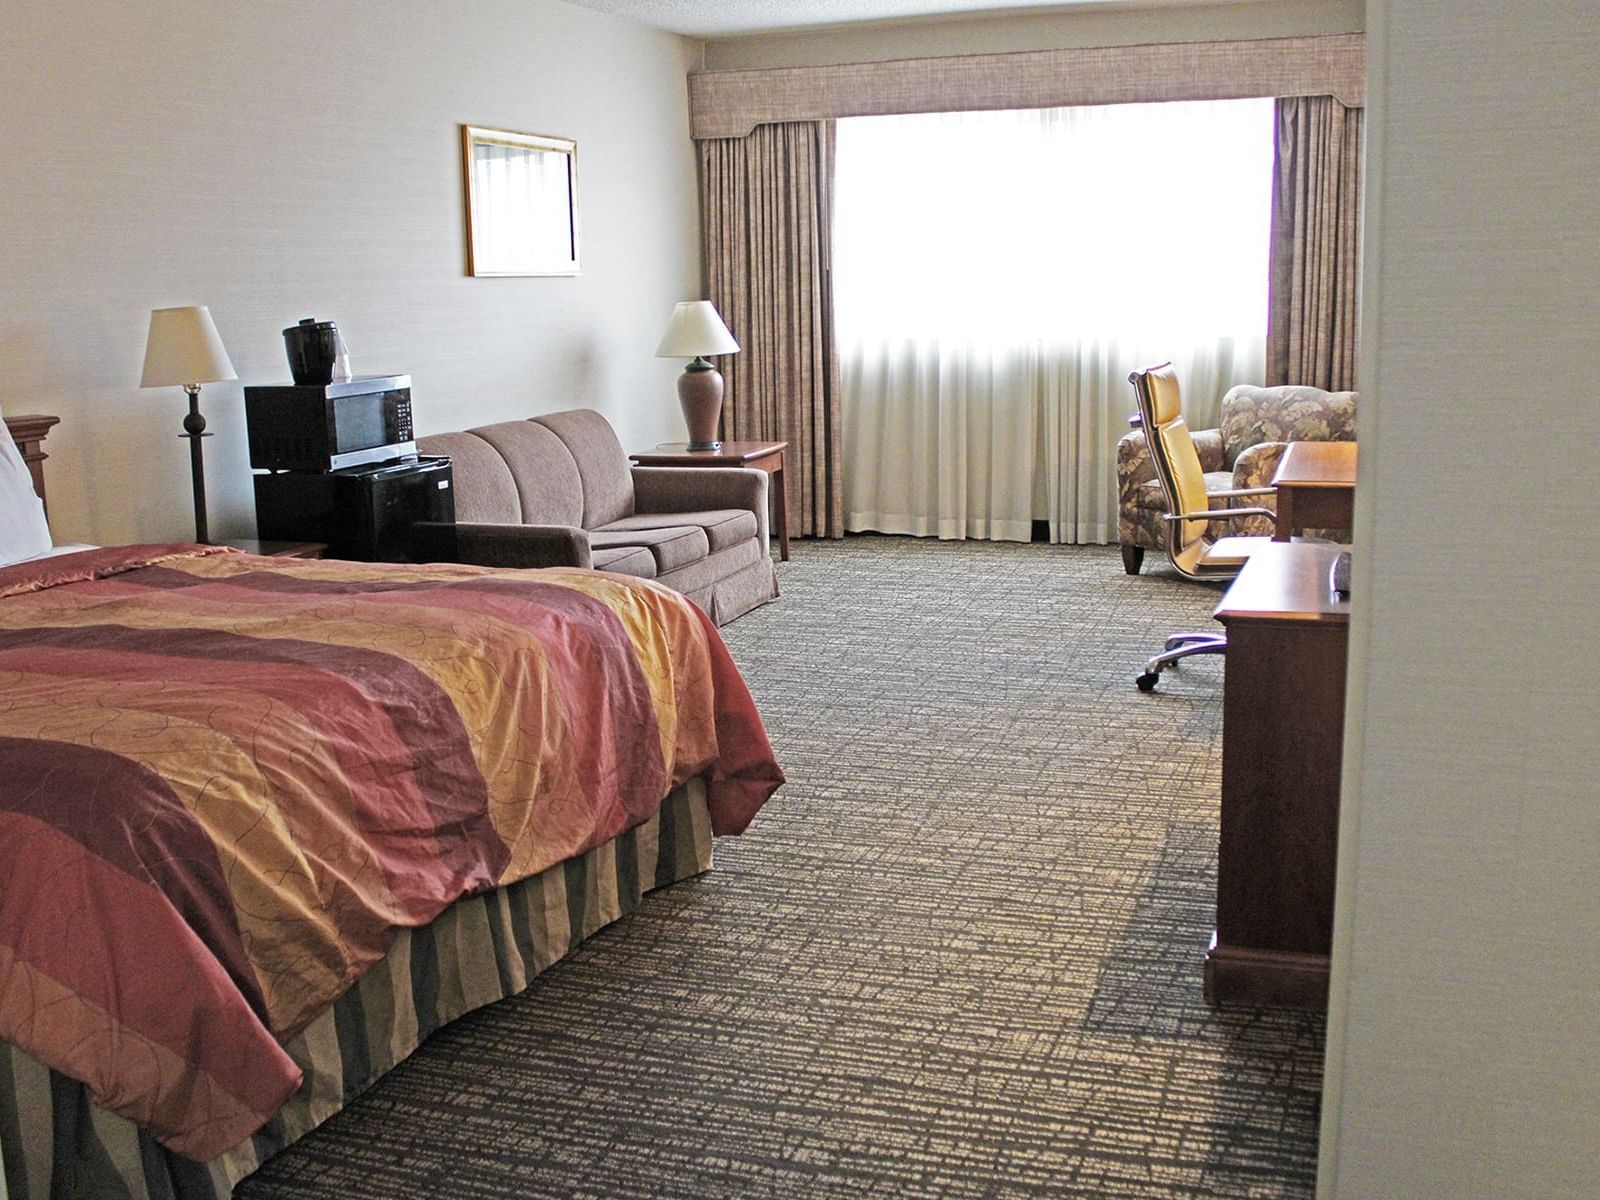 The Executive King Guest Room features a king bed, refrigerator, microwave, and a generous seating area with a sleeper sofa.